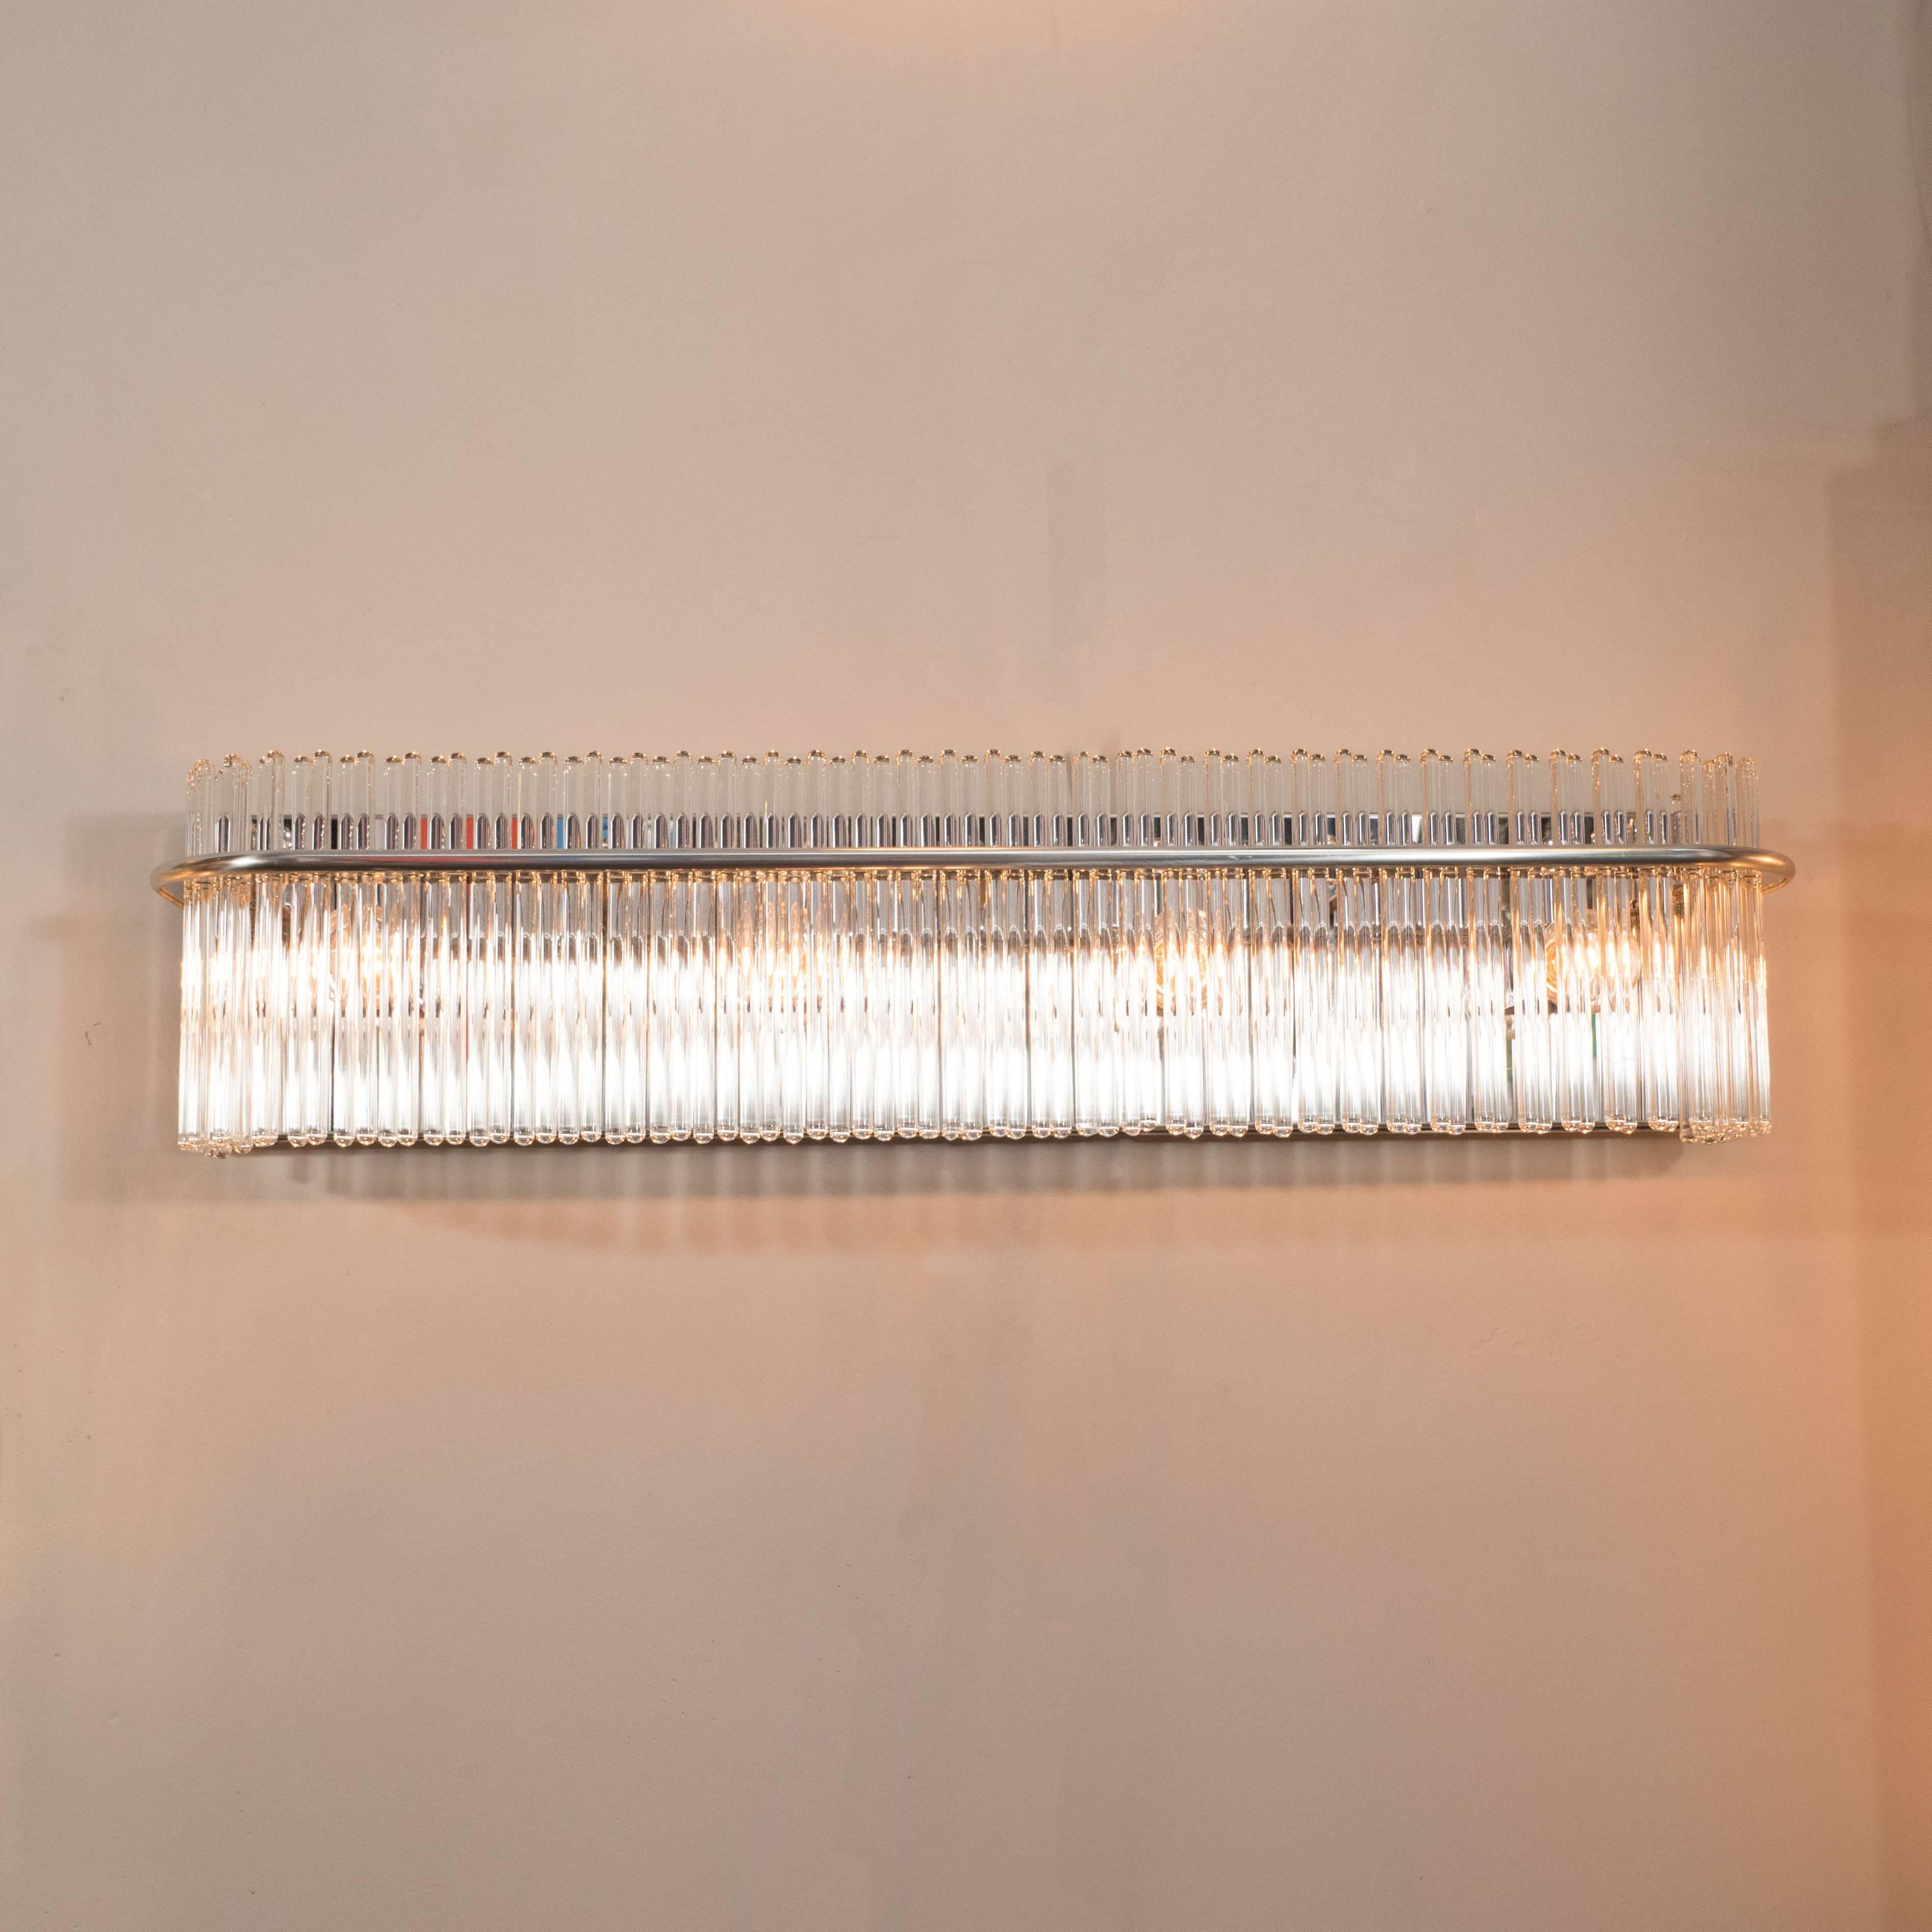 This stunning vanity light features an abundance of translucent glass rods secured with a streamlined brushed chrome rod that attached to a polished brass base. Founded in 1904, the Massachusetts based company Lightolier has specialized in